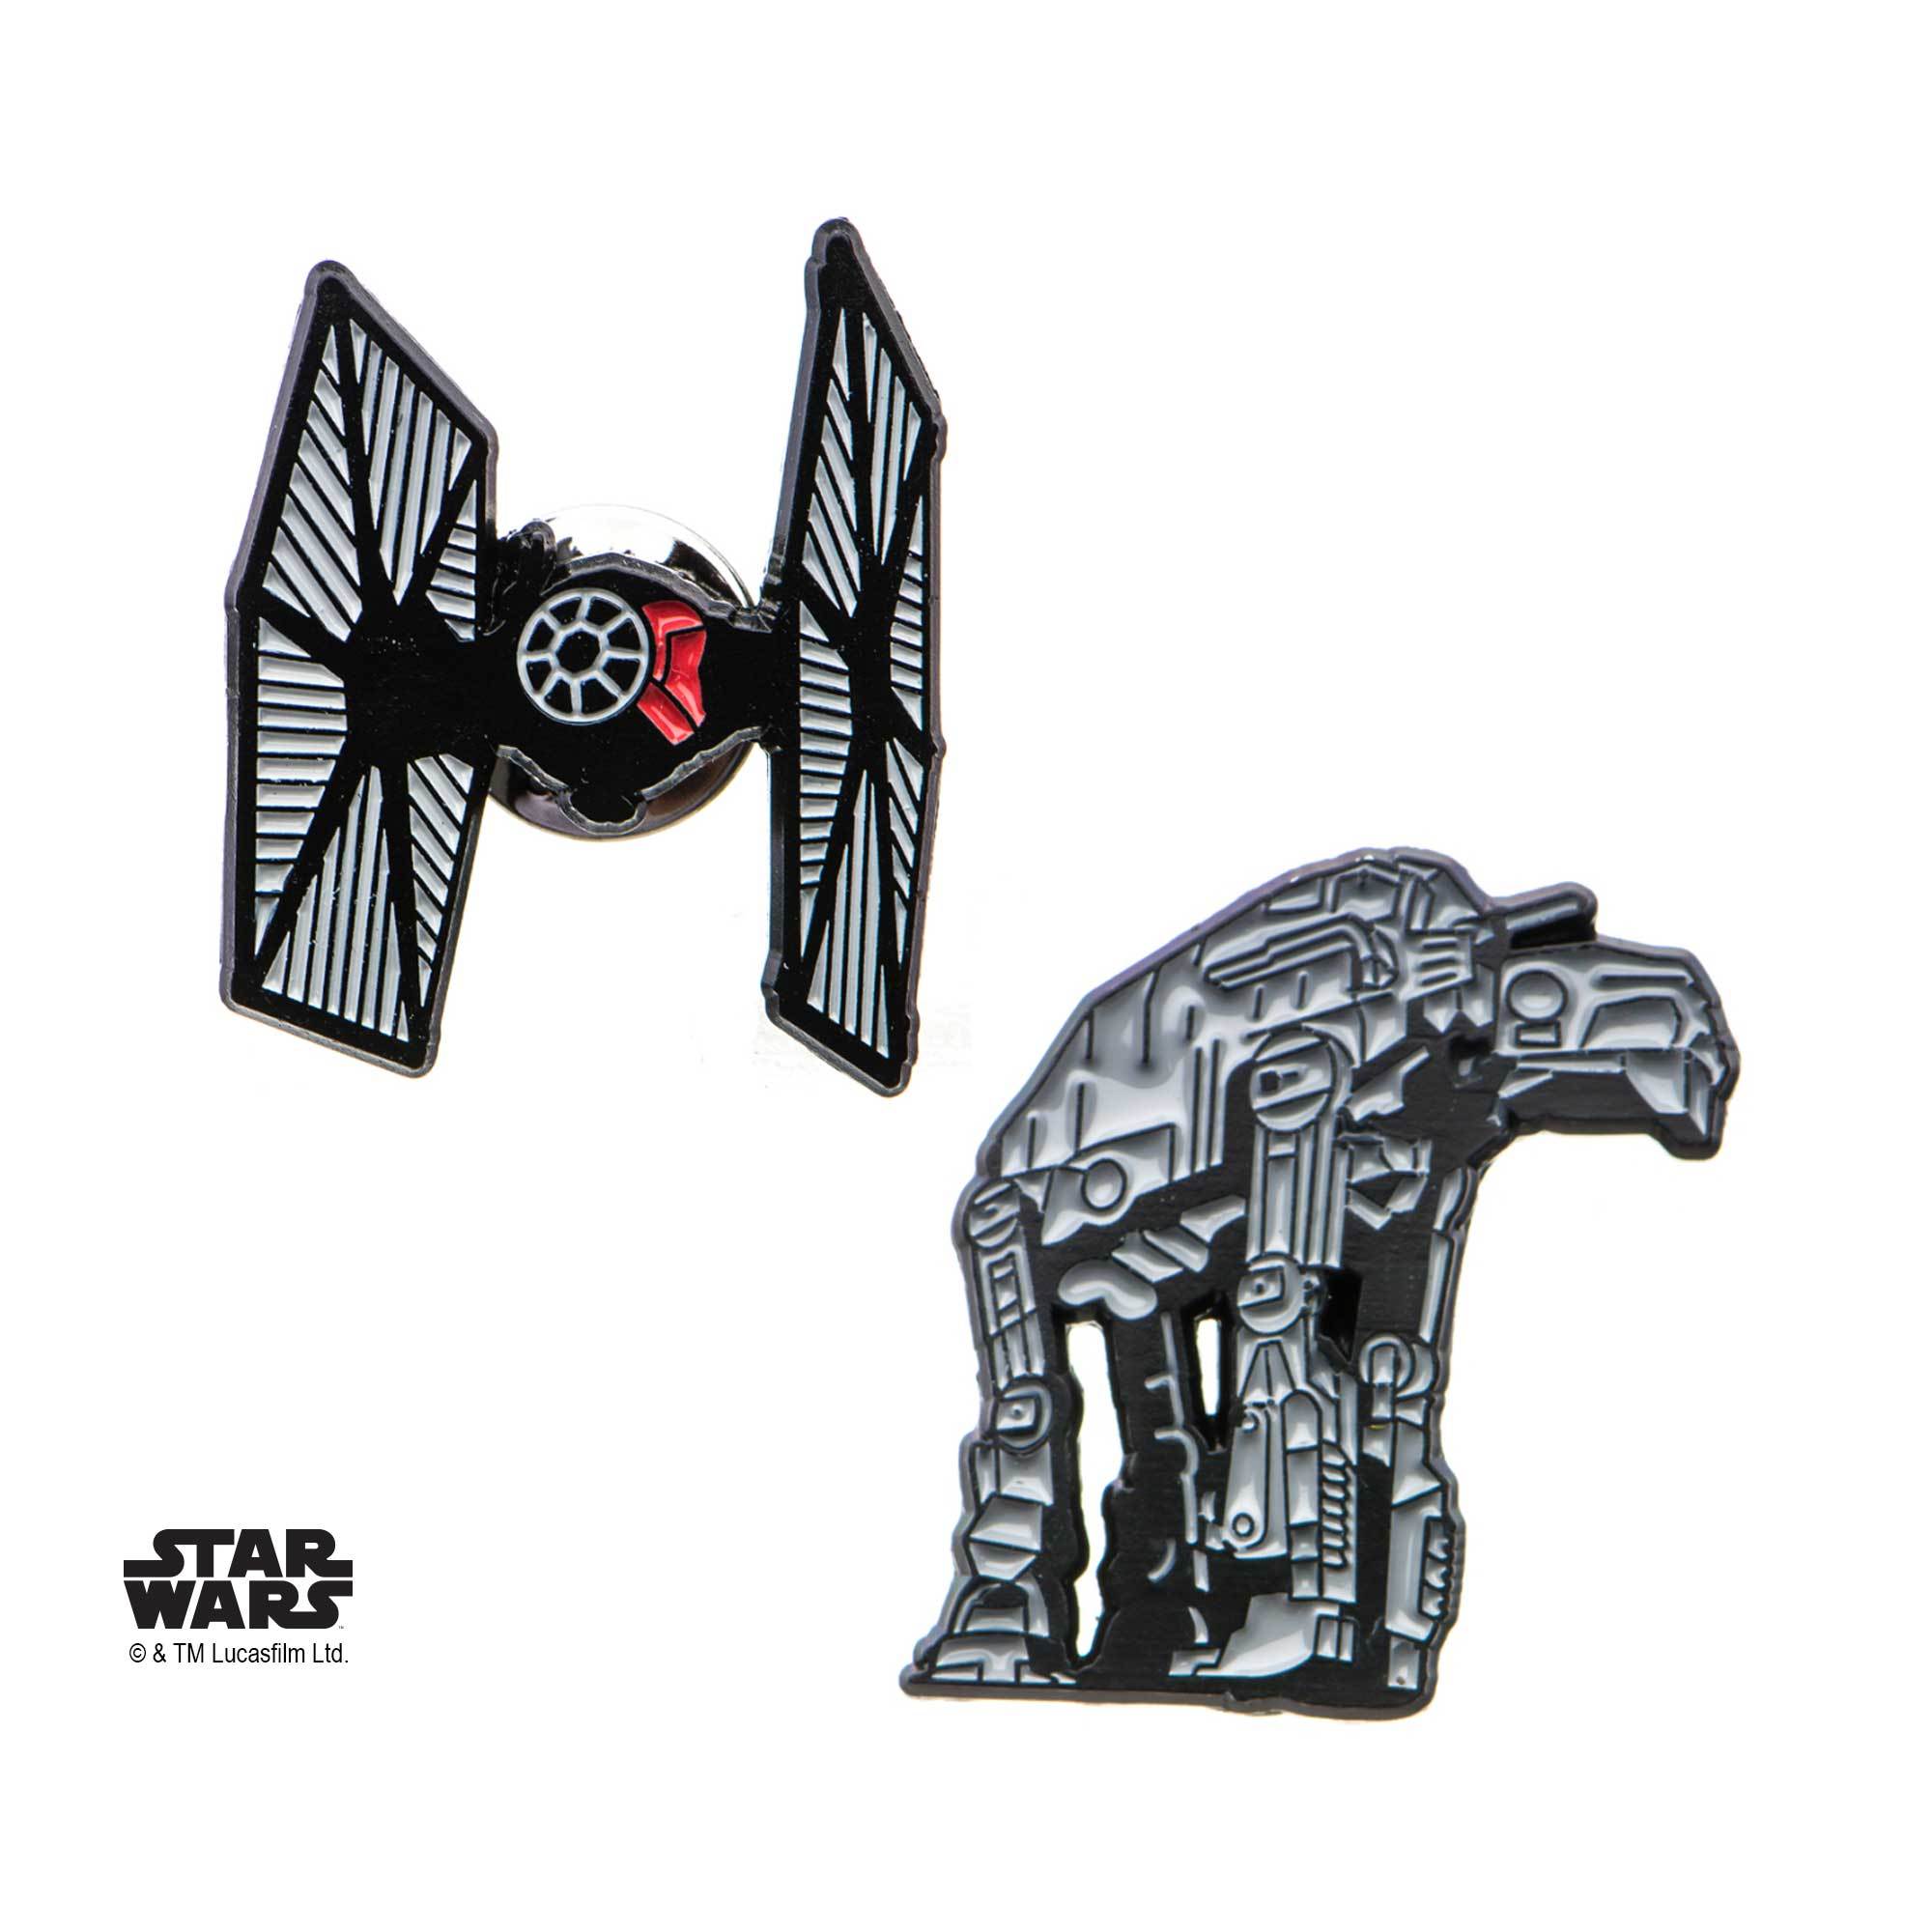 Star Wars Episode 8 Cut Out AT-AT and Tie Fighter Enamel Lapel Pin Set